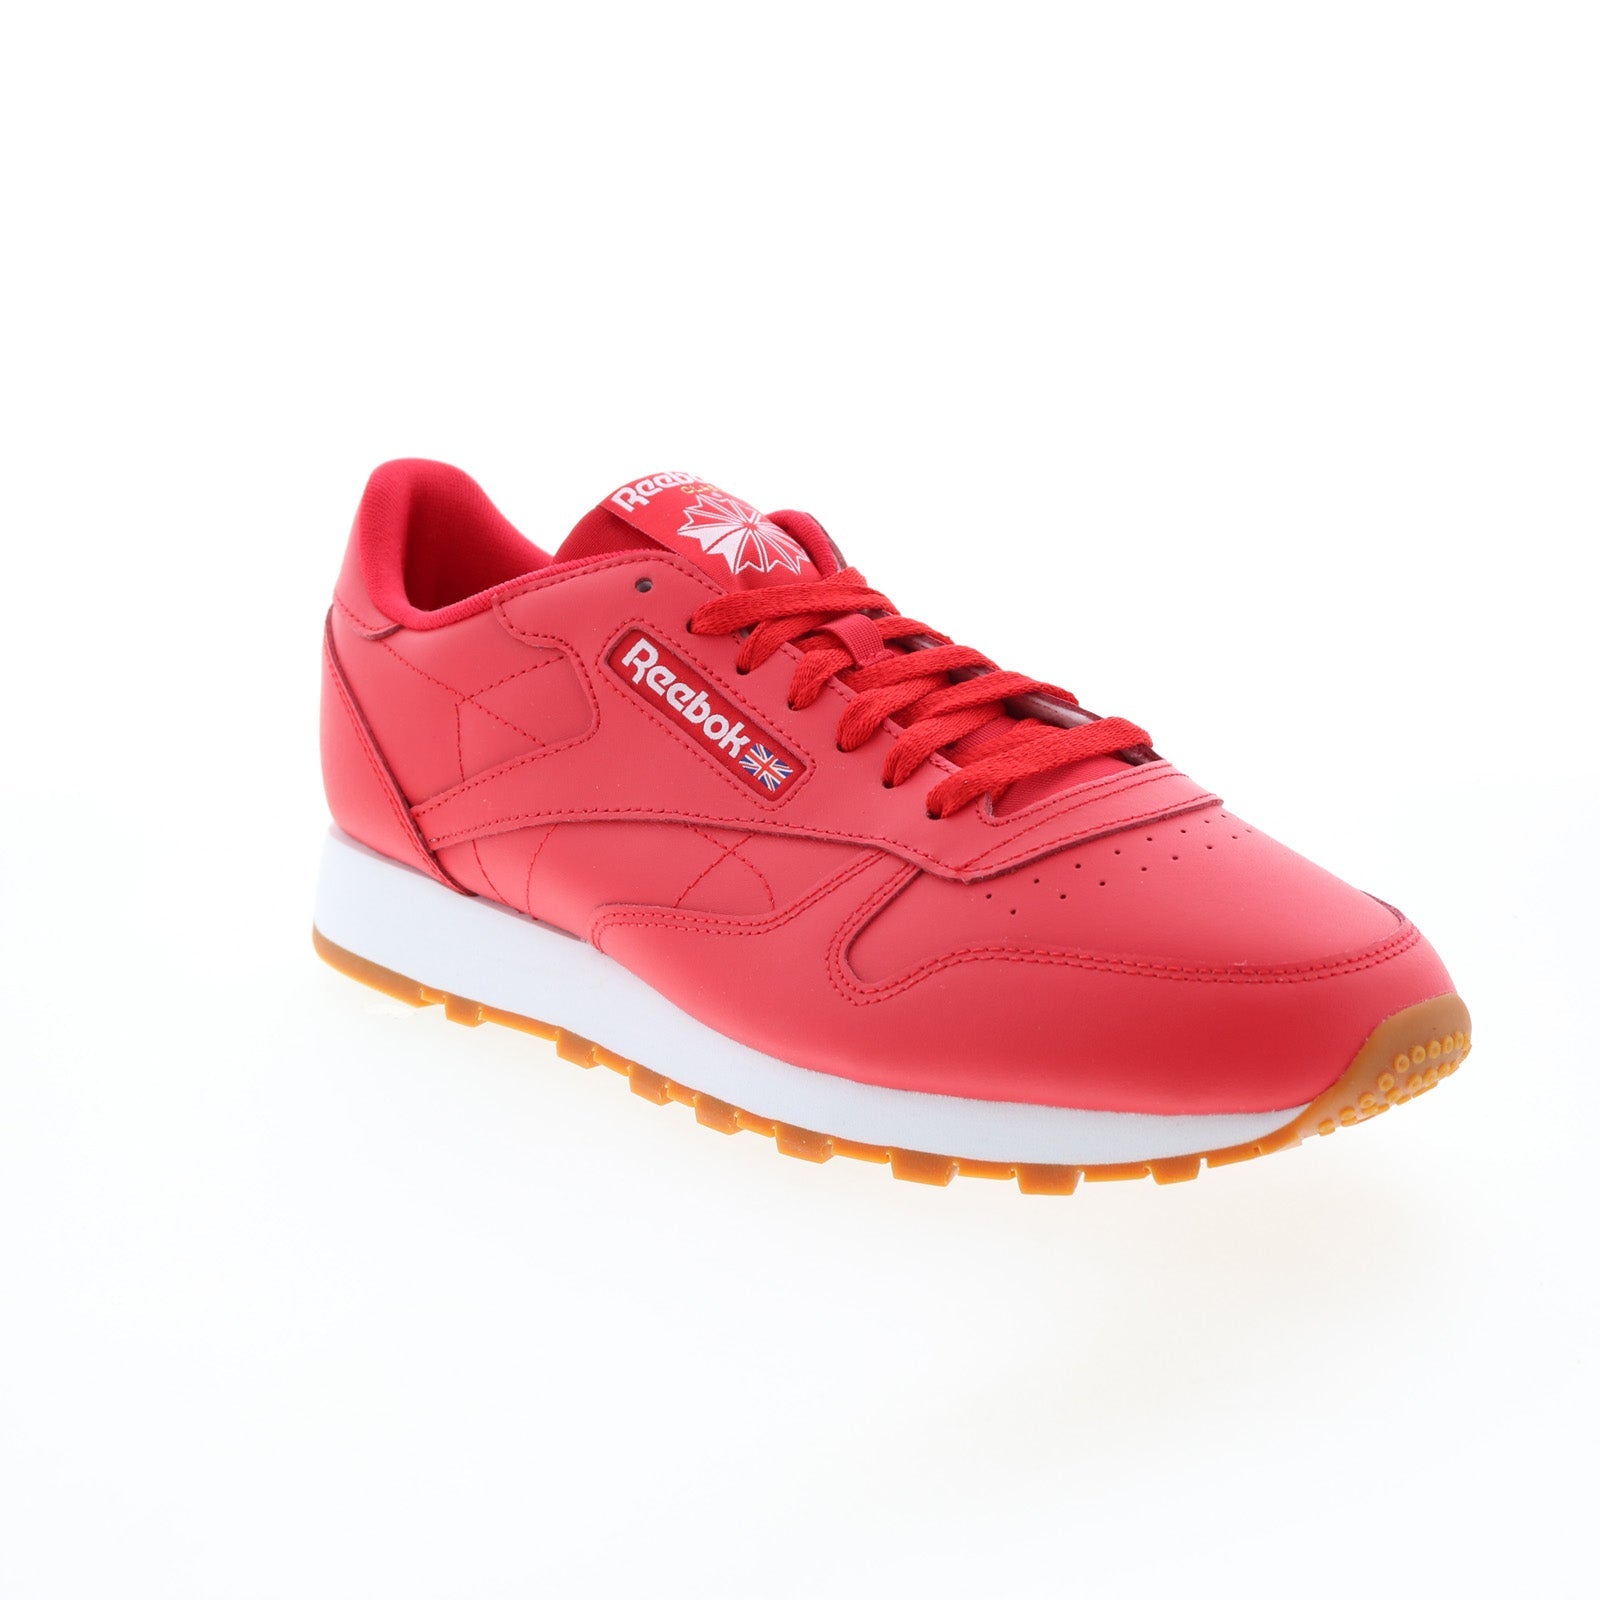 metriek Annoteren Napier Reebok Classic Leather GY3601 Mens Red Lace Up Lifestyle Sneakers Shoe -  Ruze Shoes